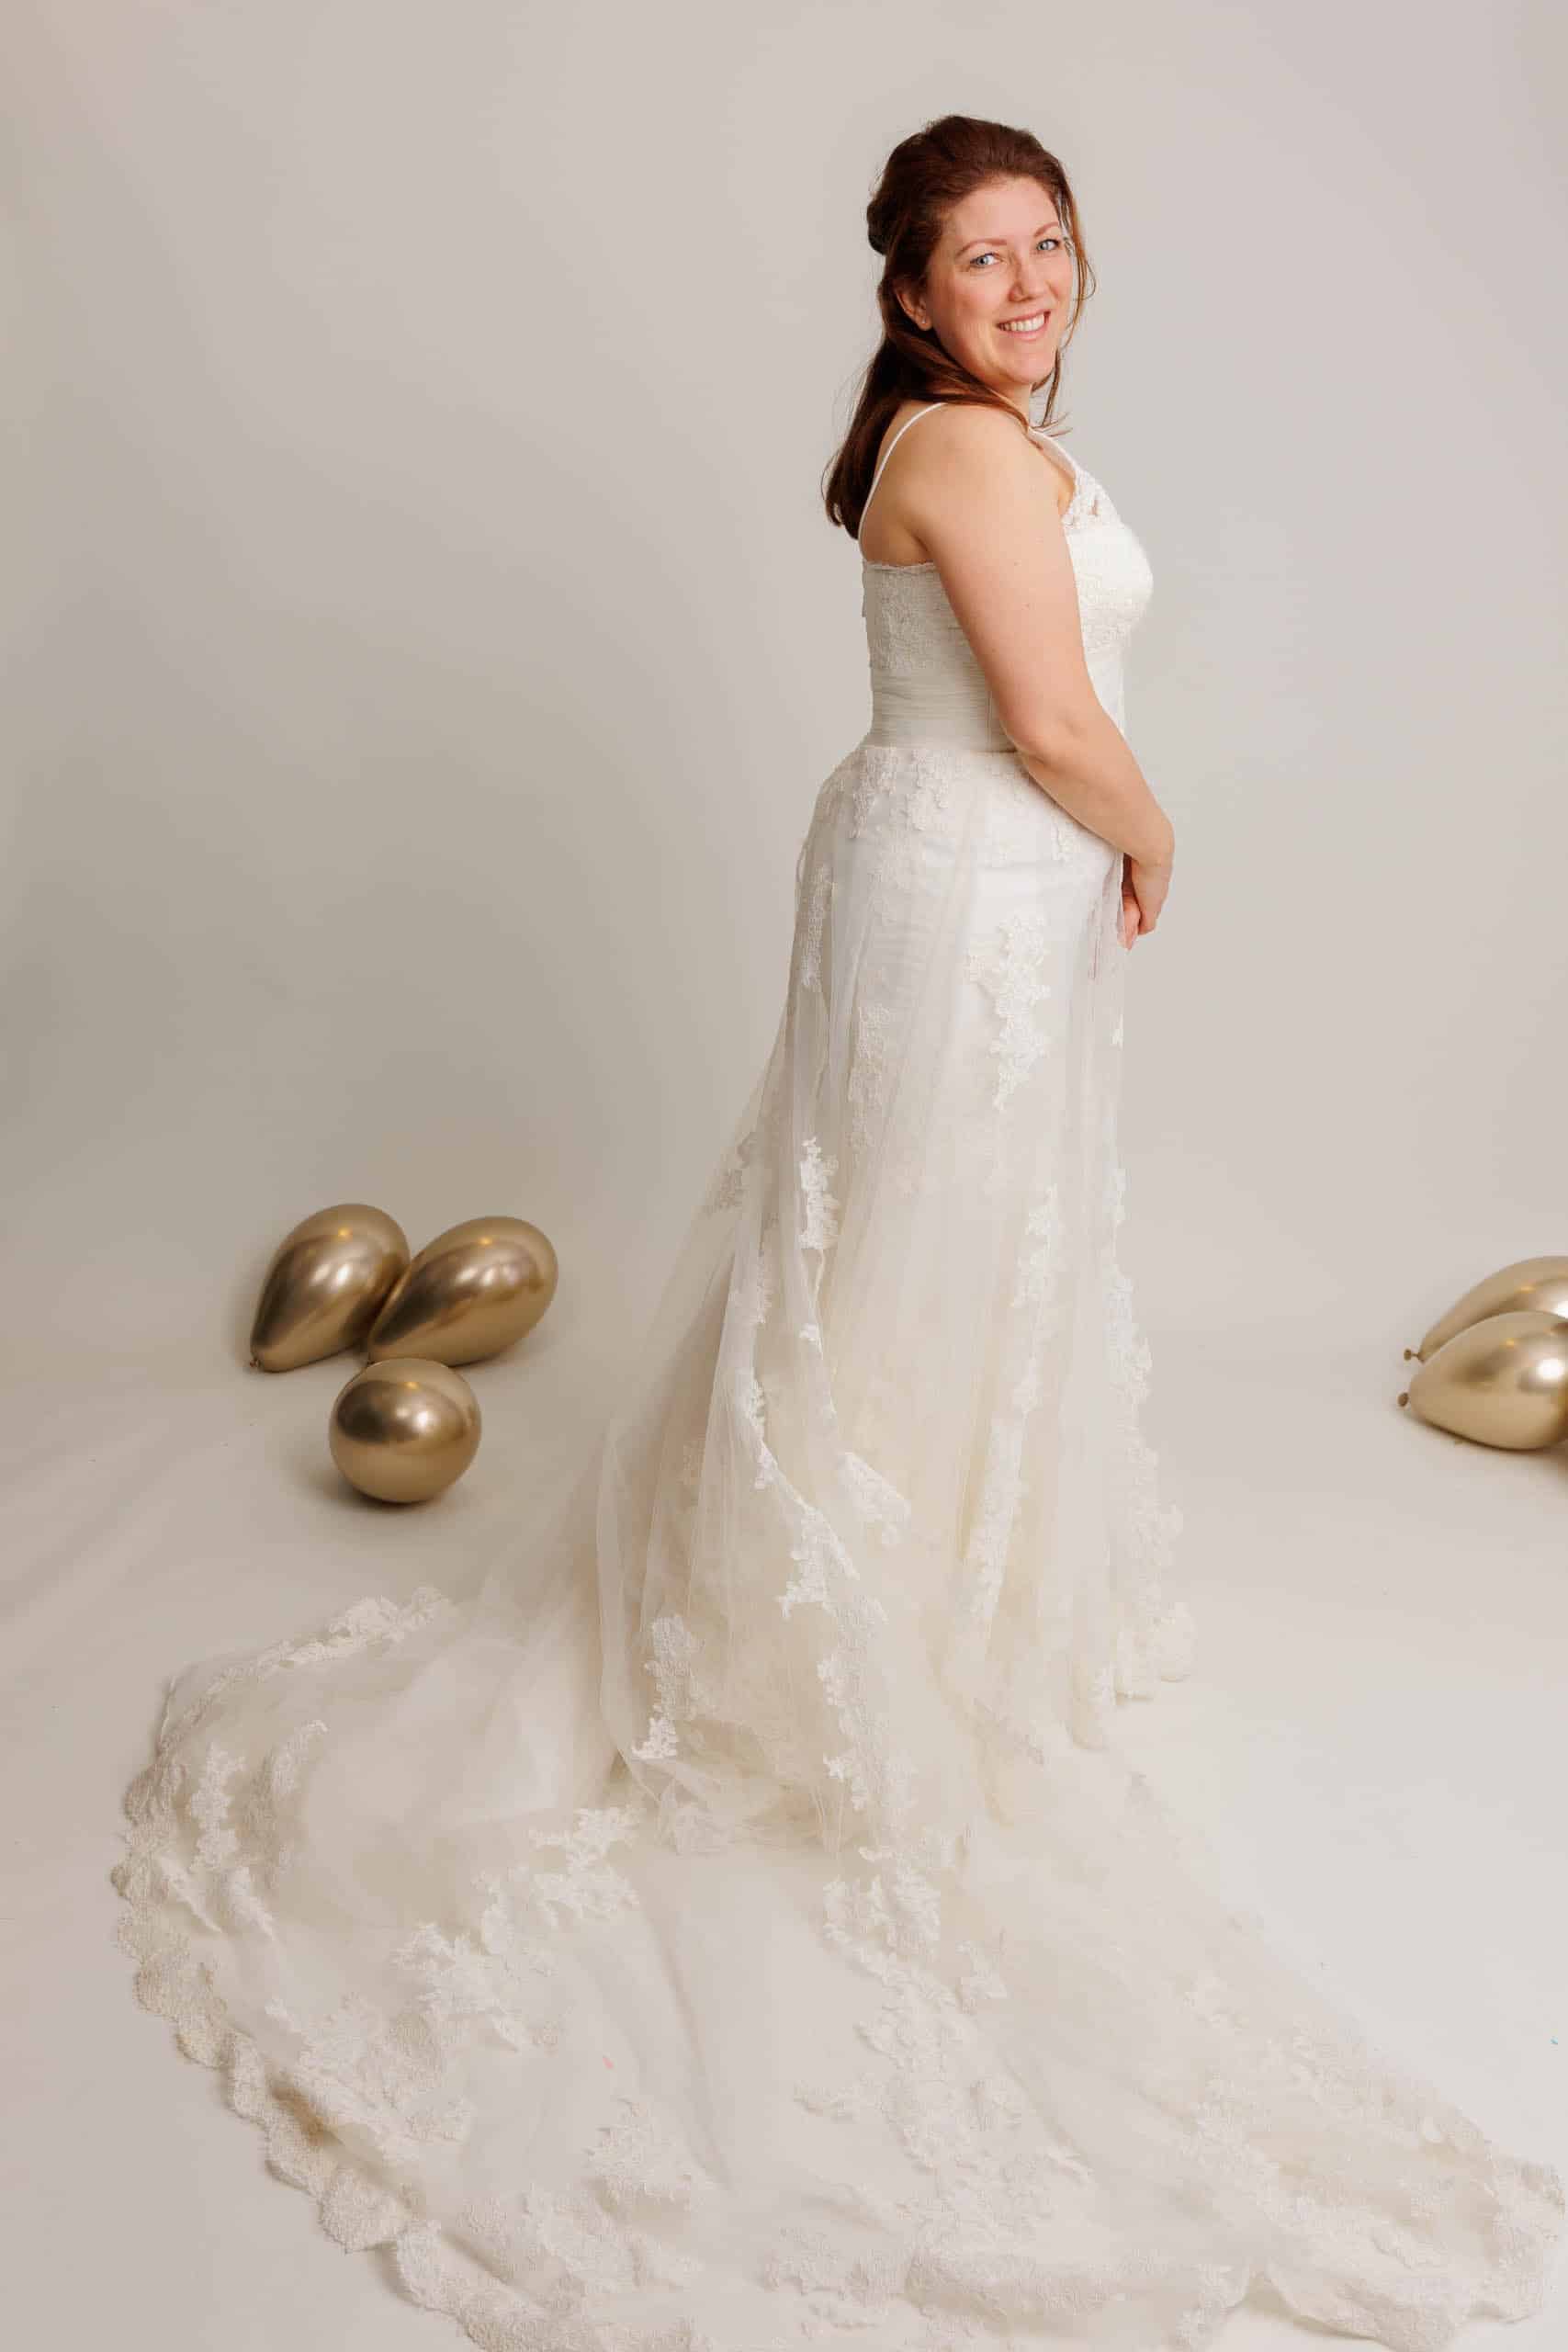 A woman in wedding dress poses for a cute photo while trying on wedding dresses.